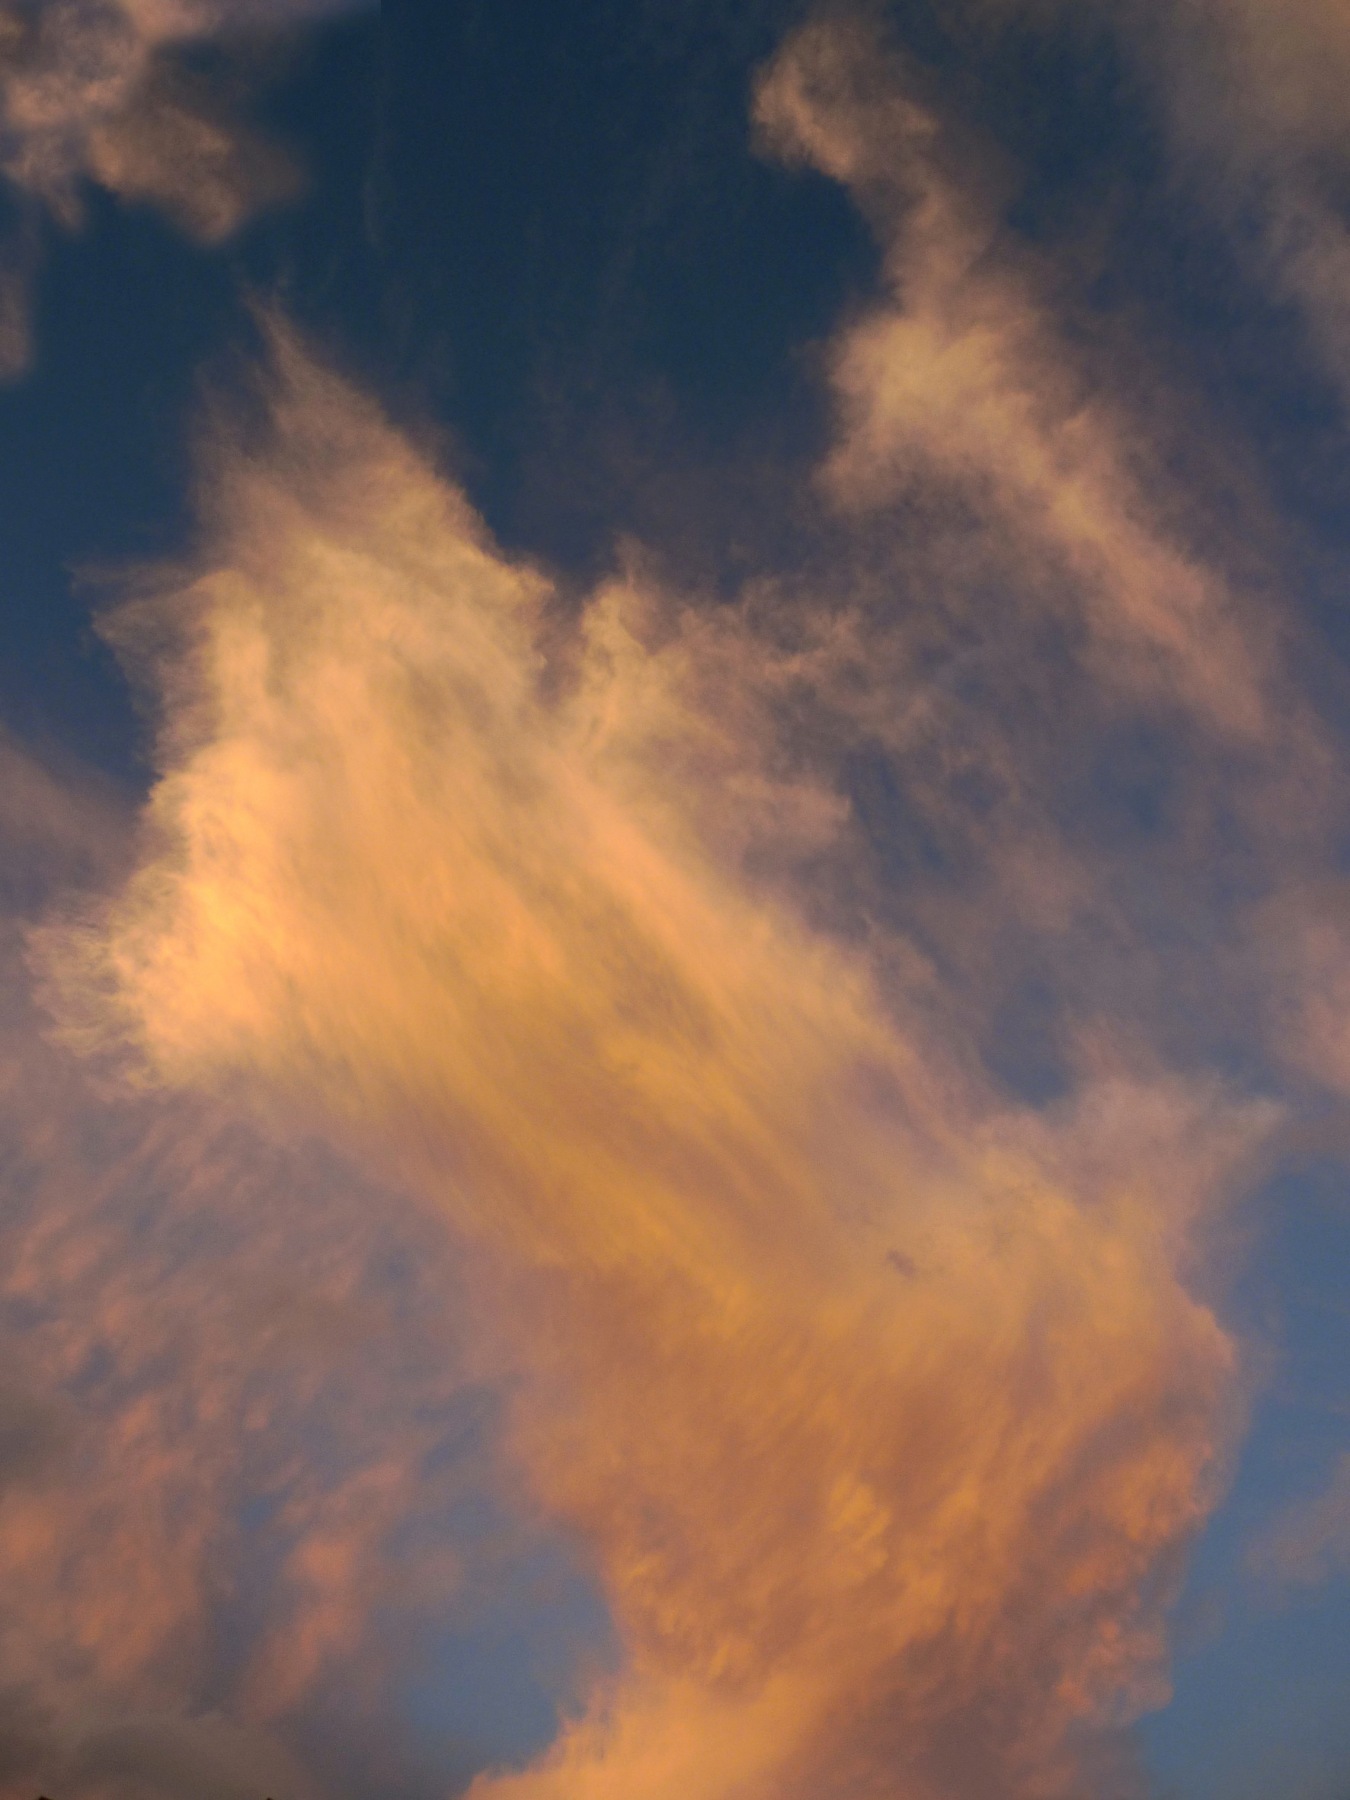 Clouds #3, 2013&nbsp;(from the series&nbsp;WATER&nbsp;2013-2019). Chromogenic print, 15 1/2 x 12 7/16 inches.